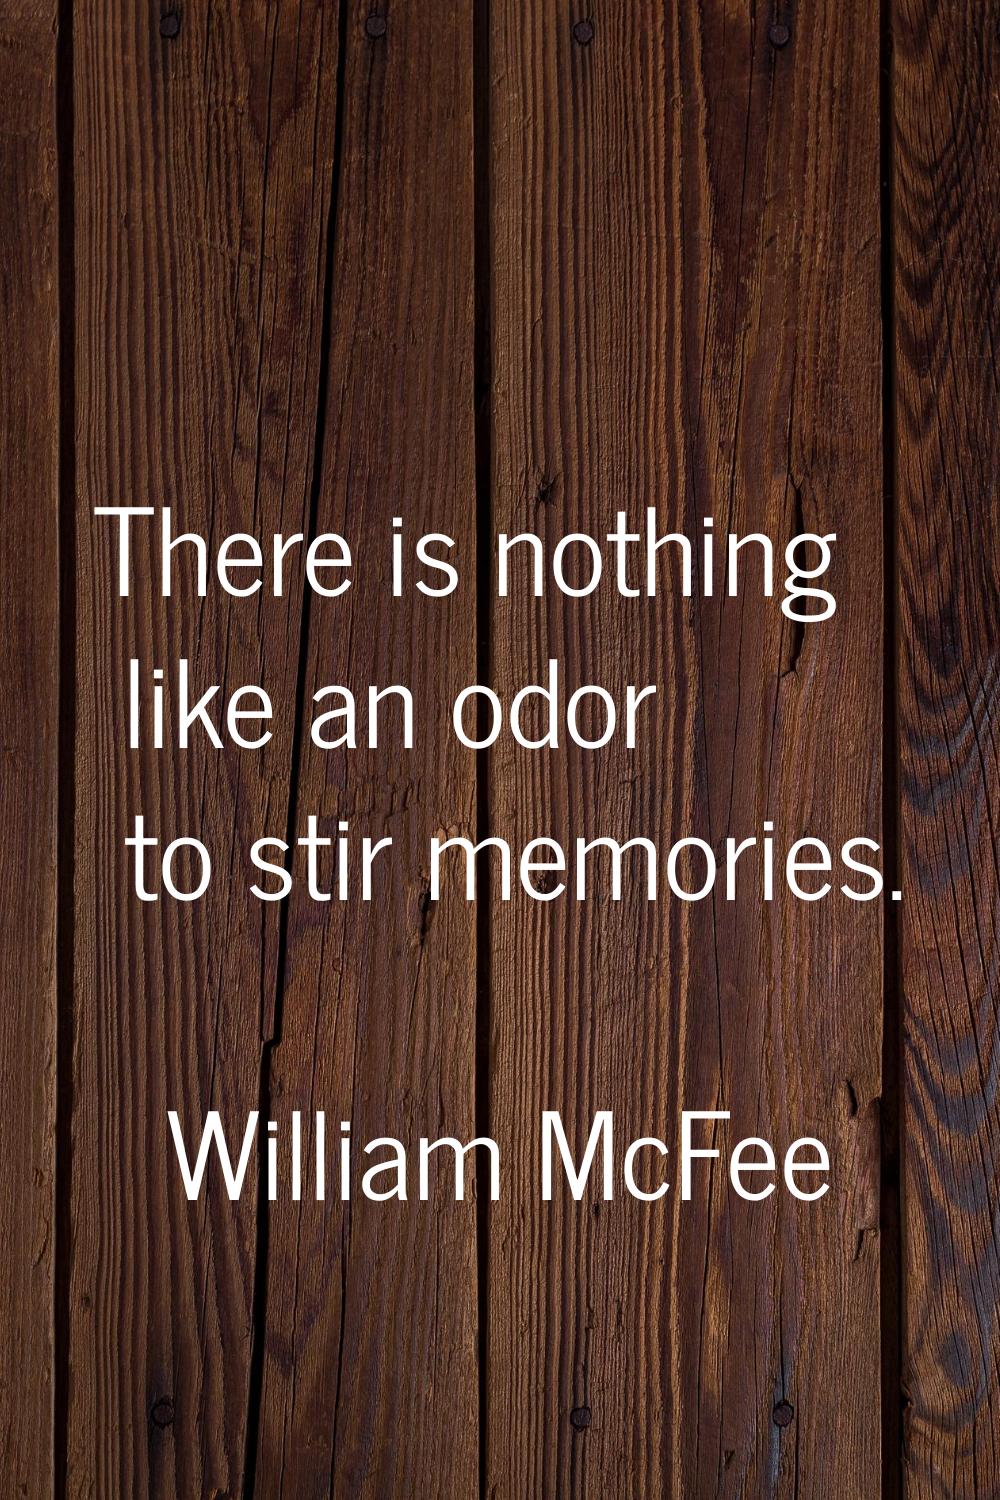 There is nothing like an odor to stir memories.